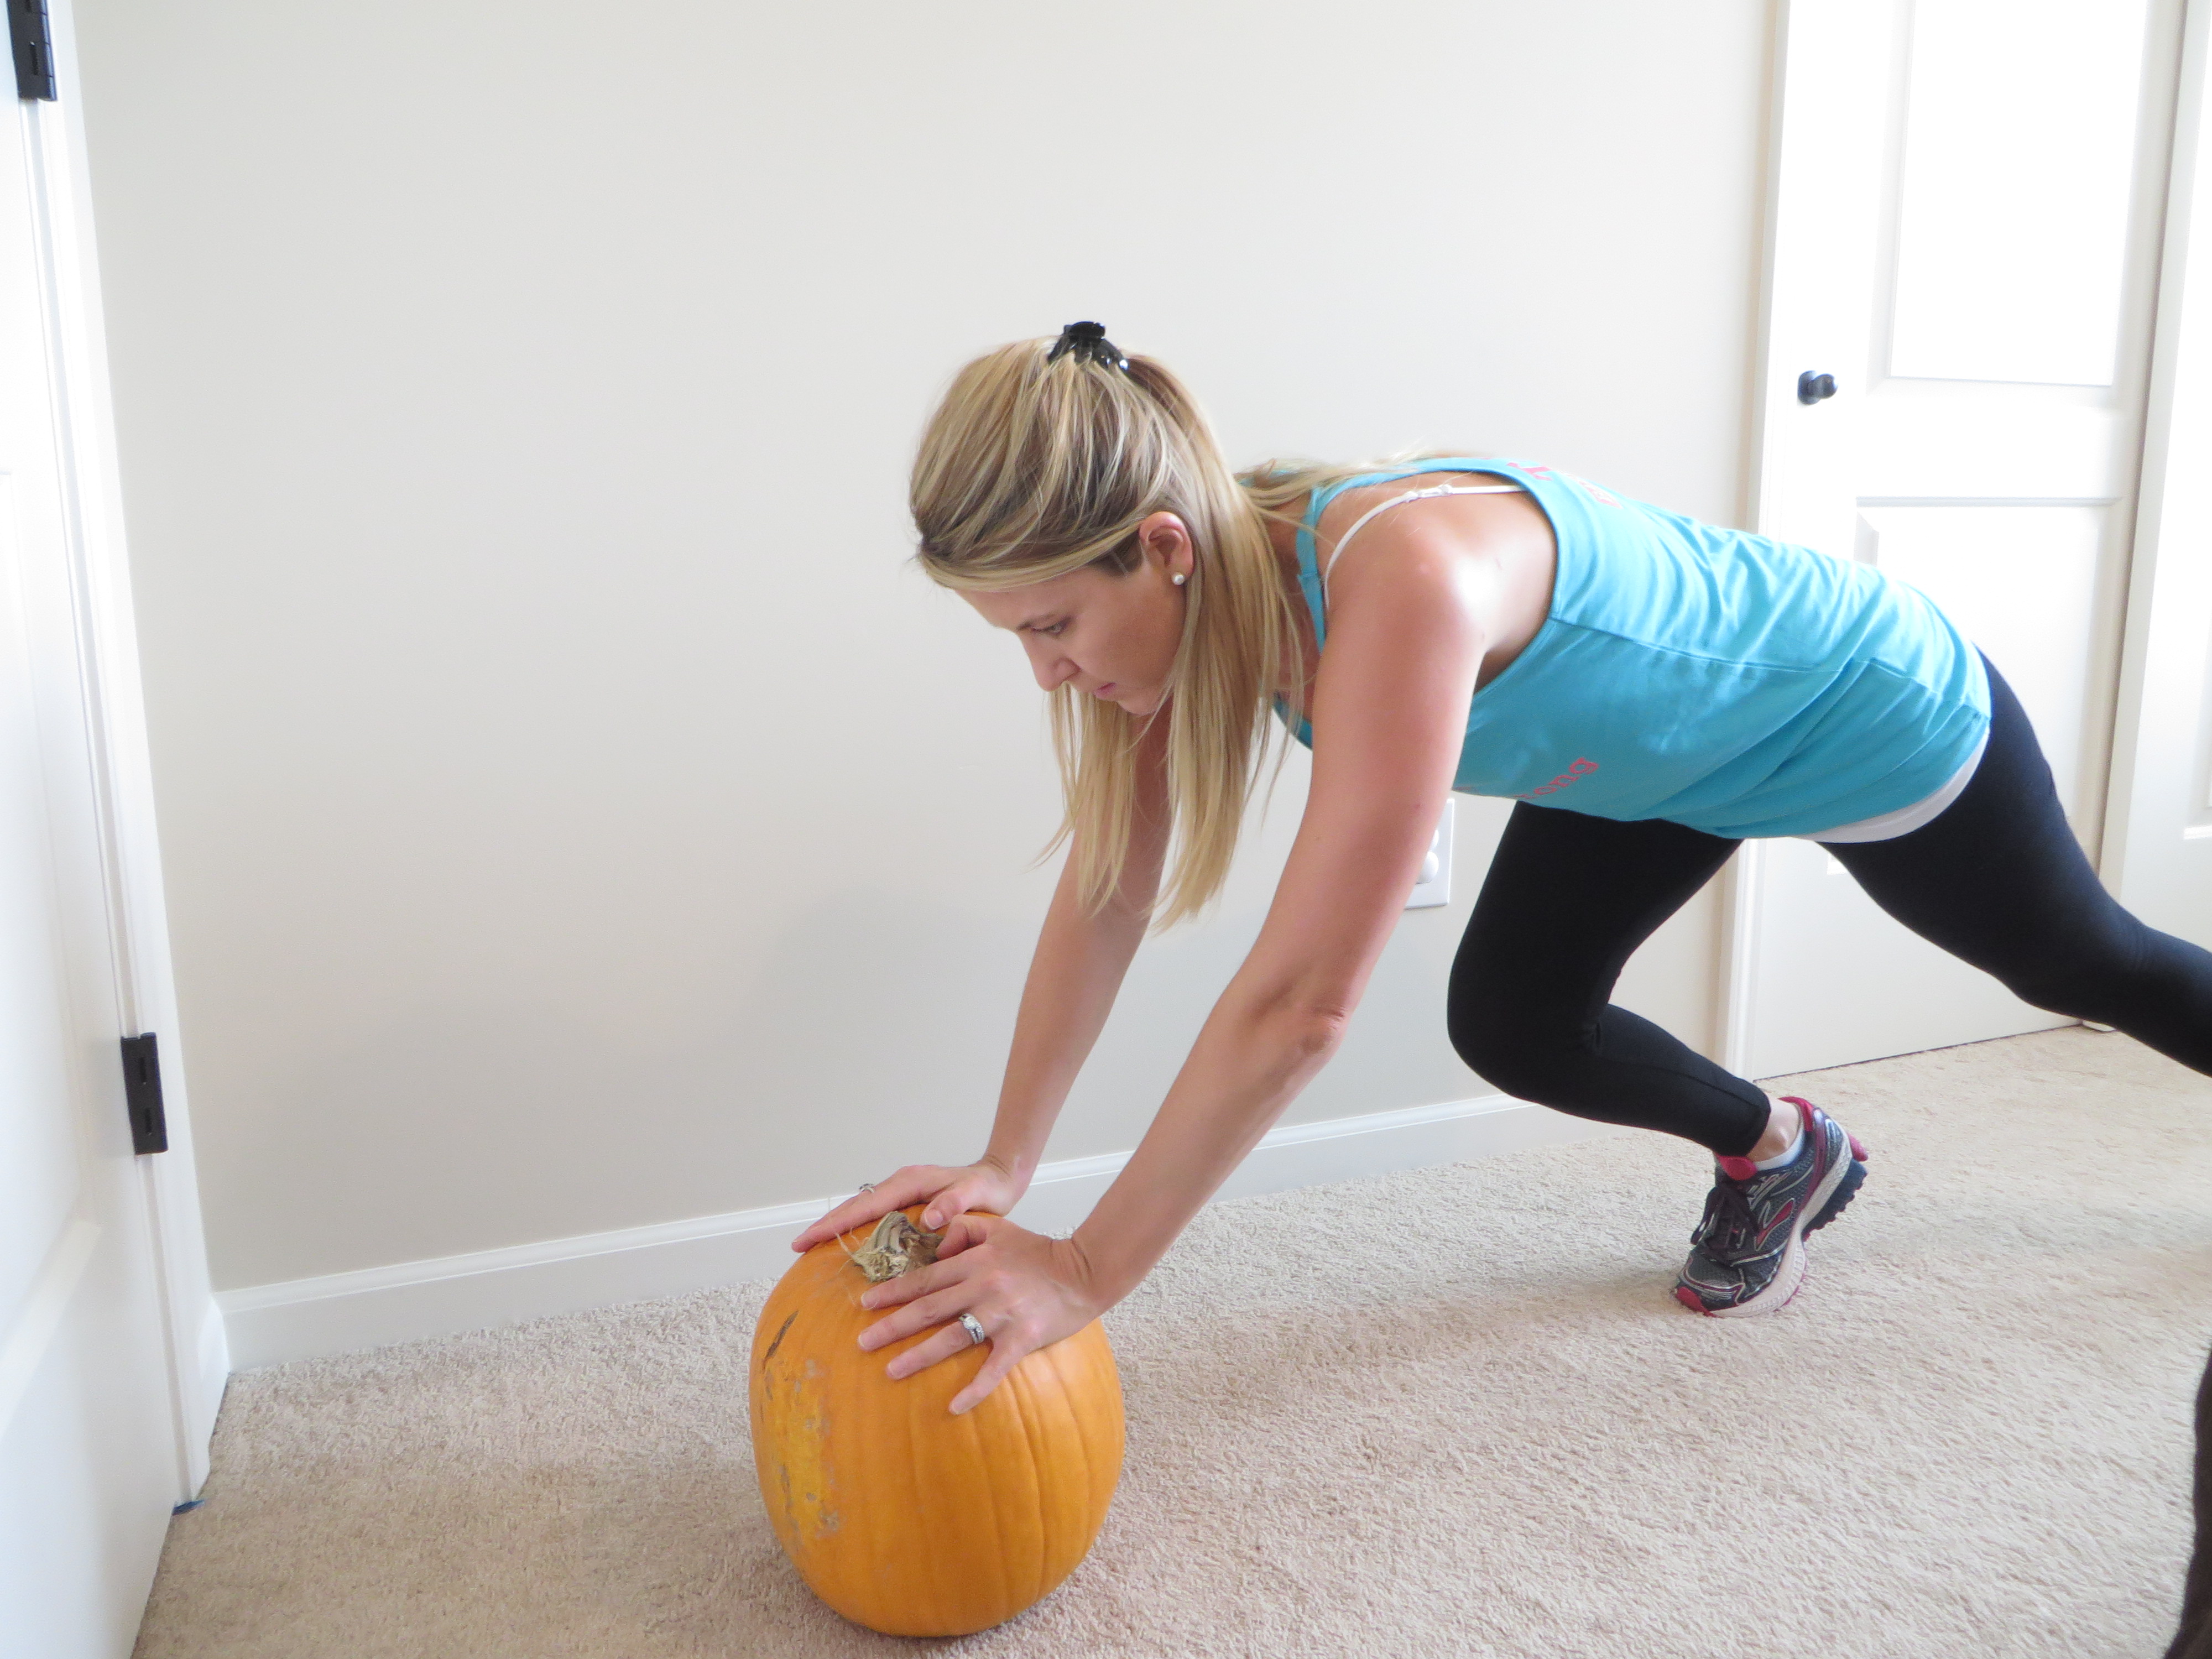 Fitness instructor Kara Babcock shows how to do exercises with pumpkins. (Submitted photos)